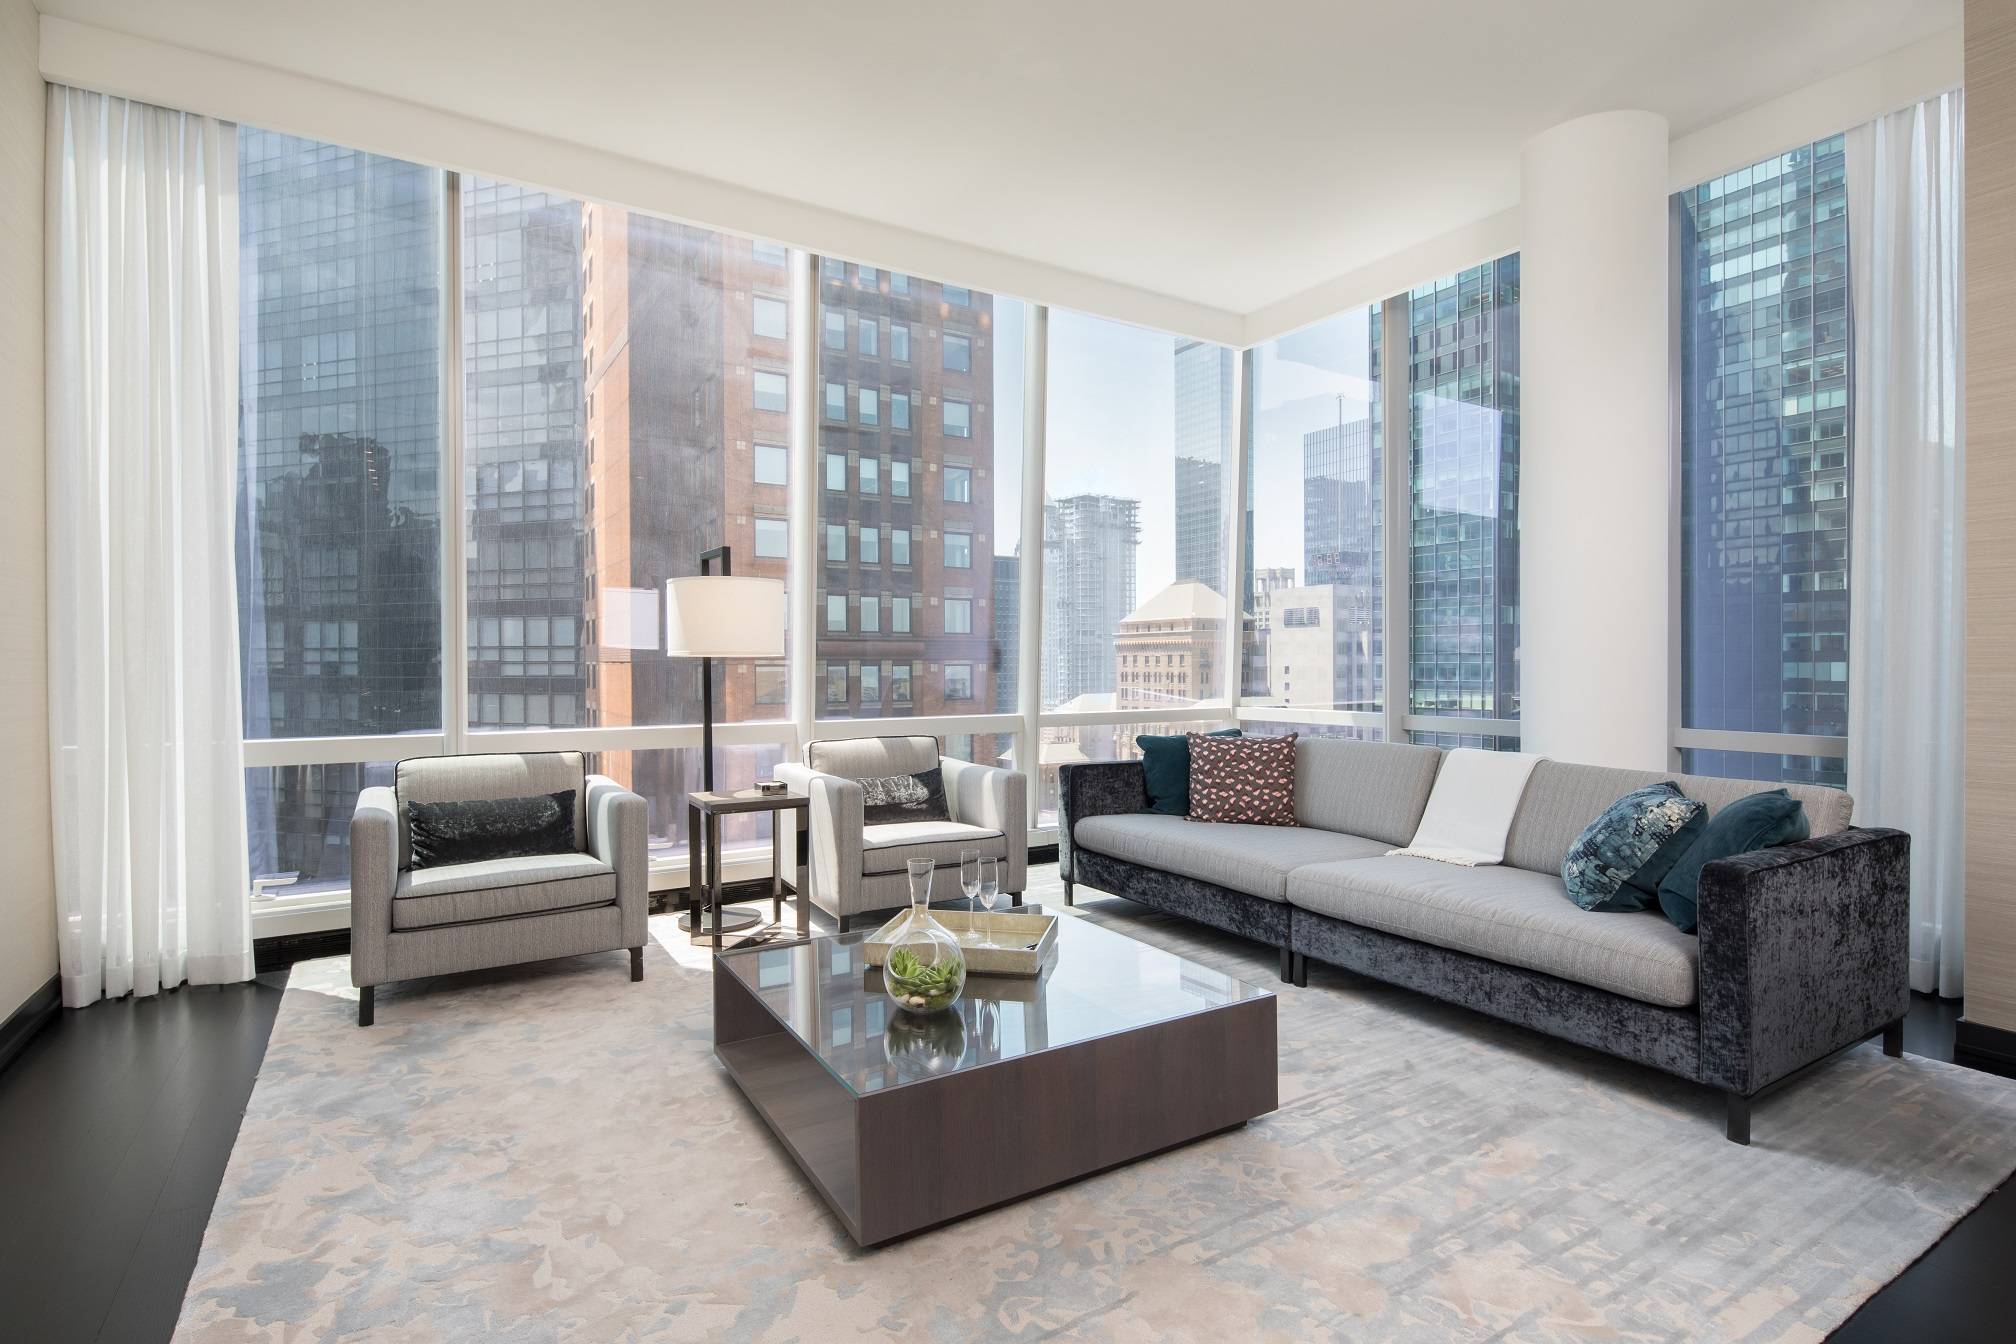 Fully furnished, move in ready, a true turn key residential experience inside the ultra luxurious One57 condominium.